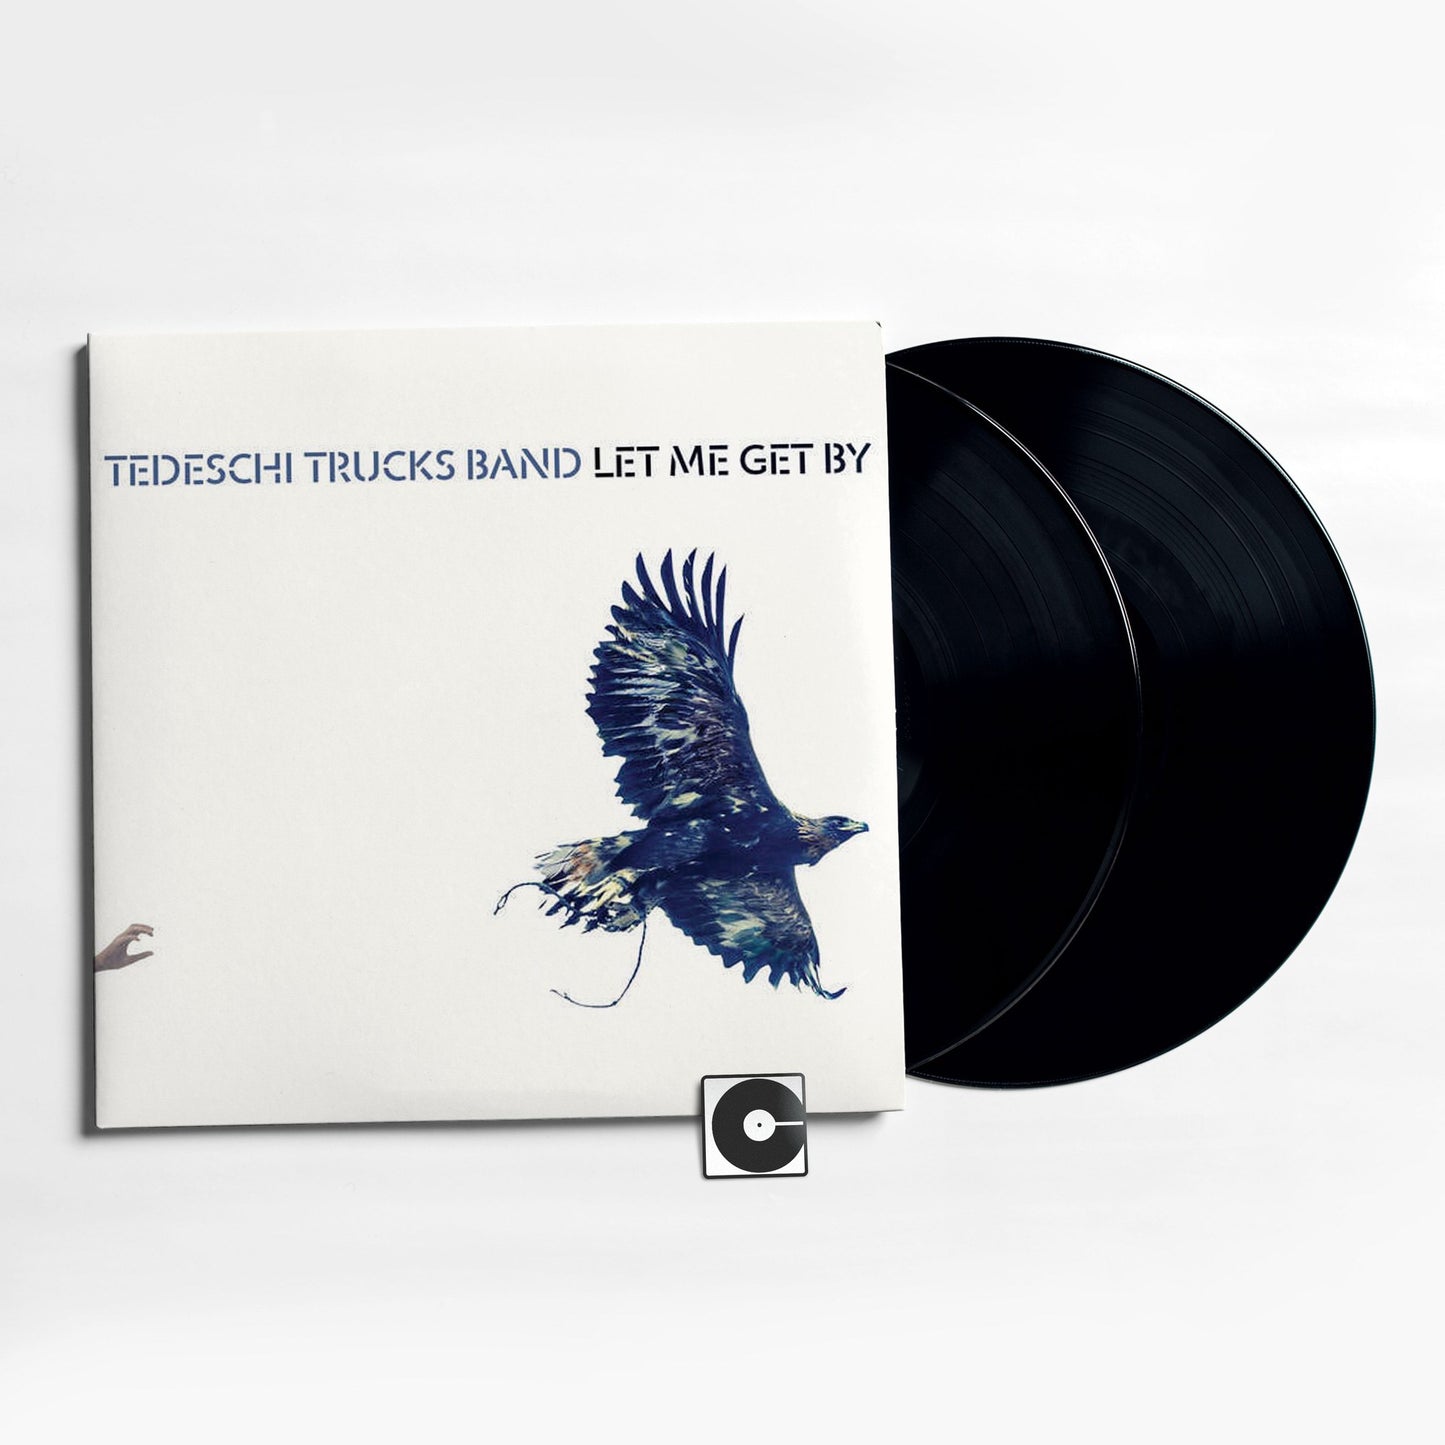 Tedeschi Trucks Band - "Let Me Get By"